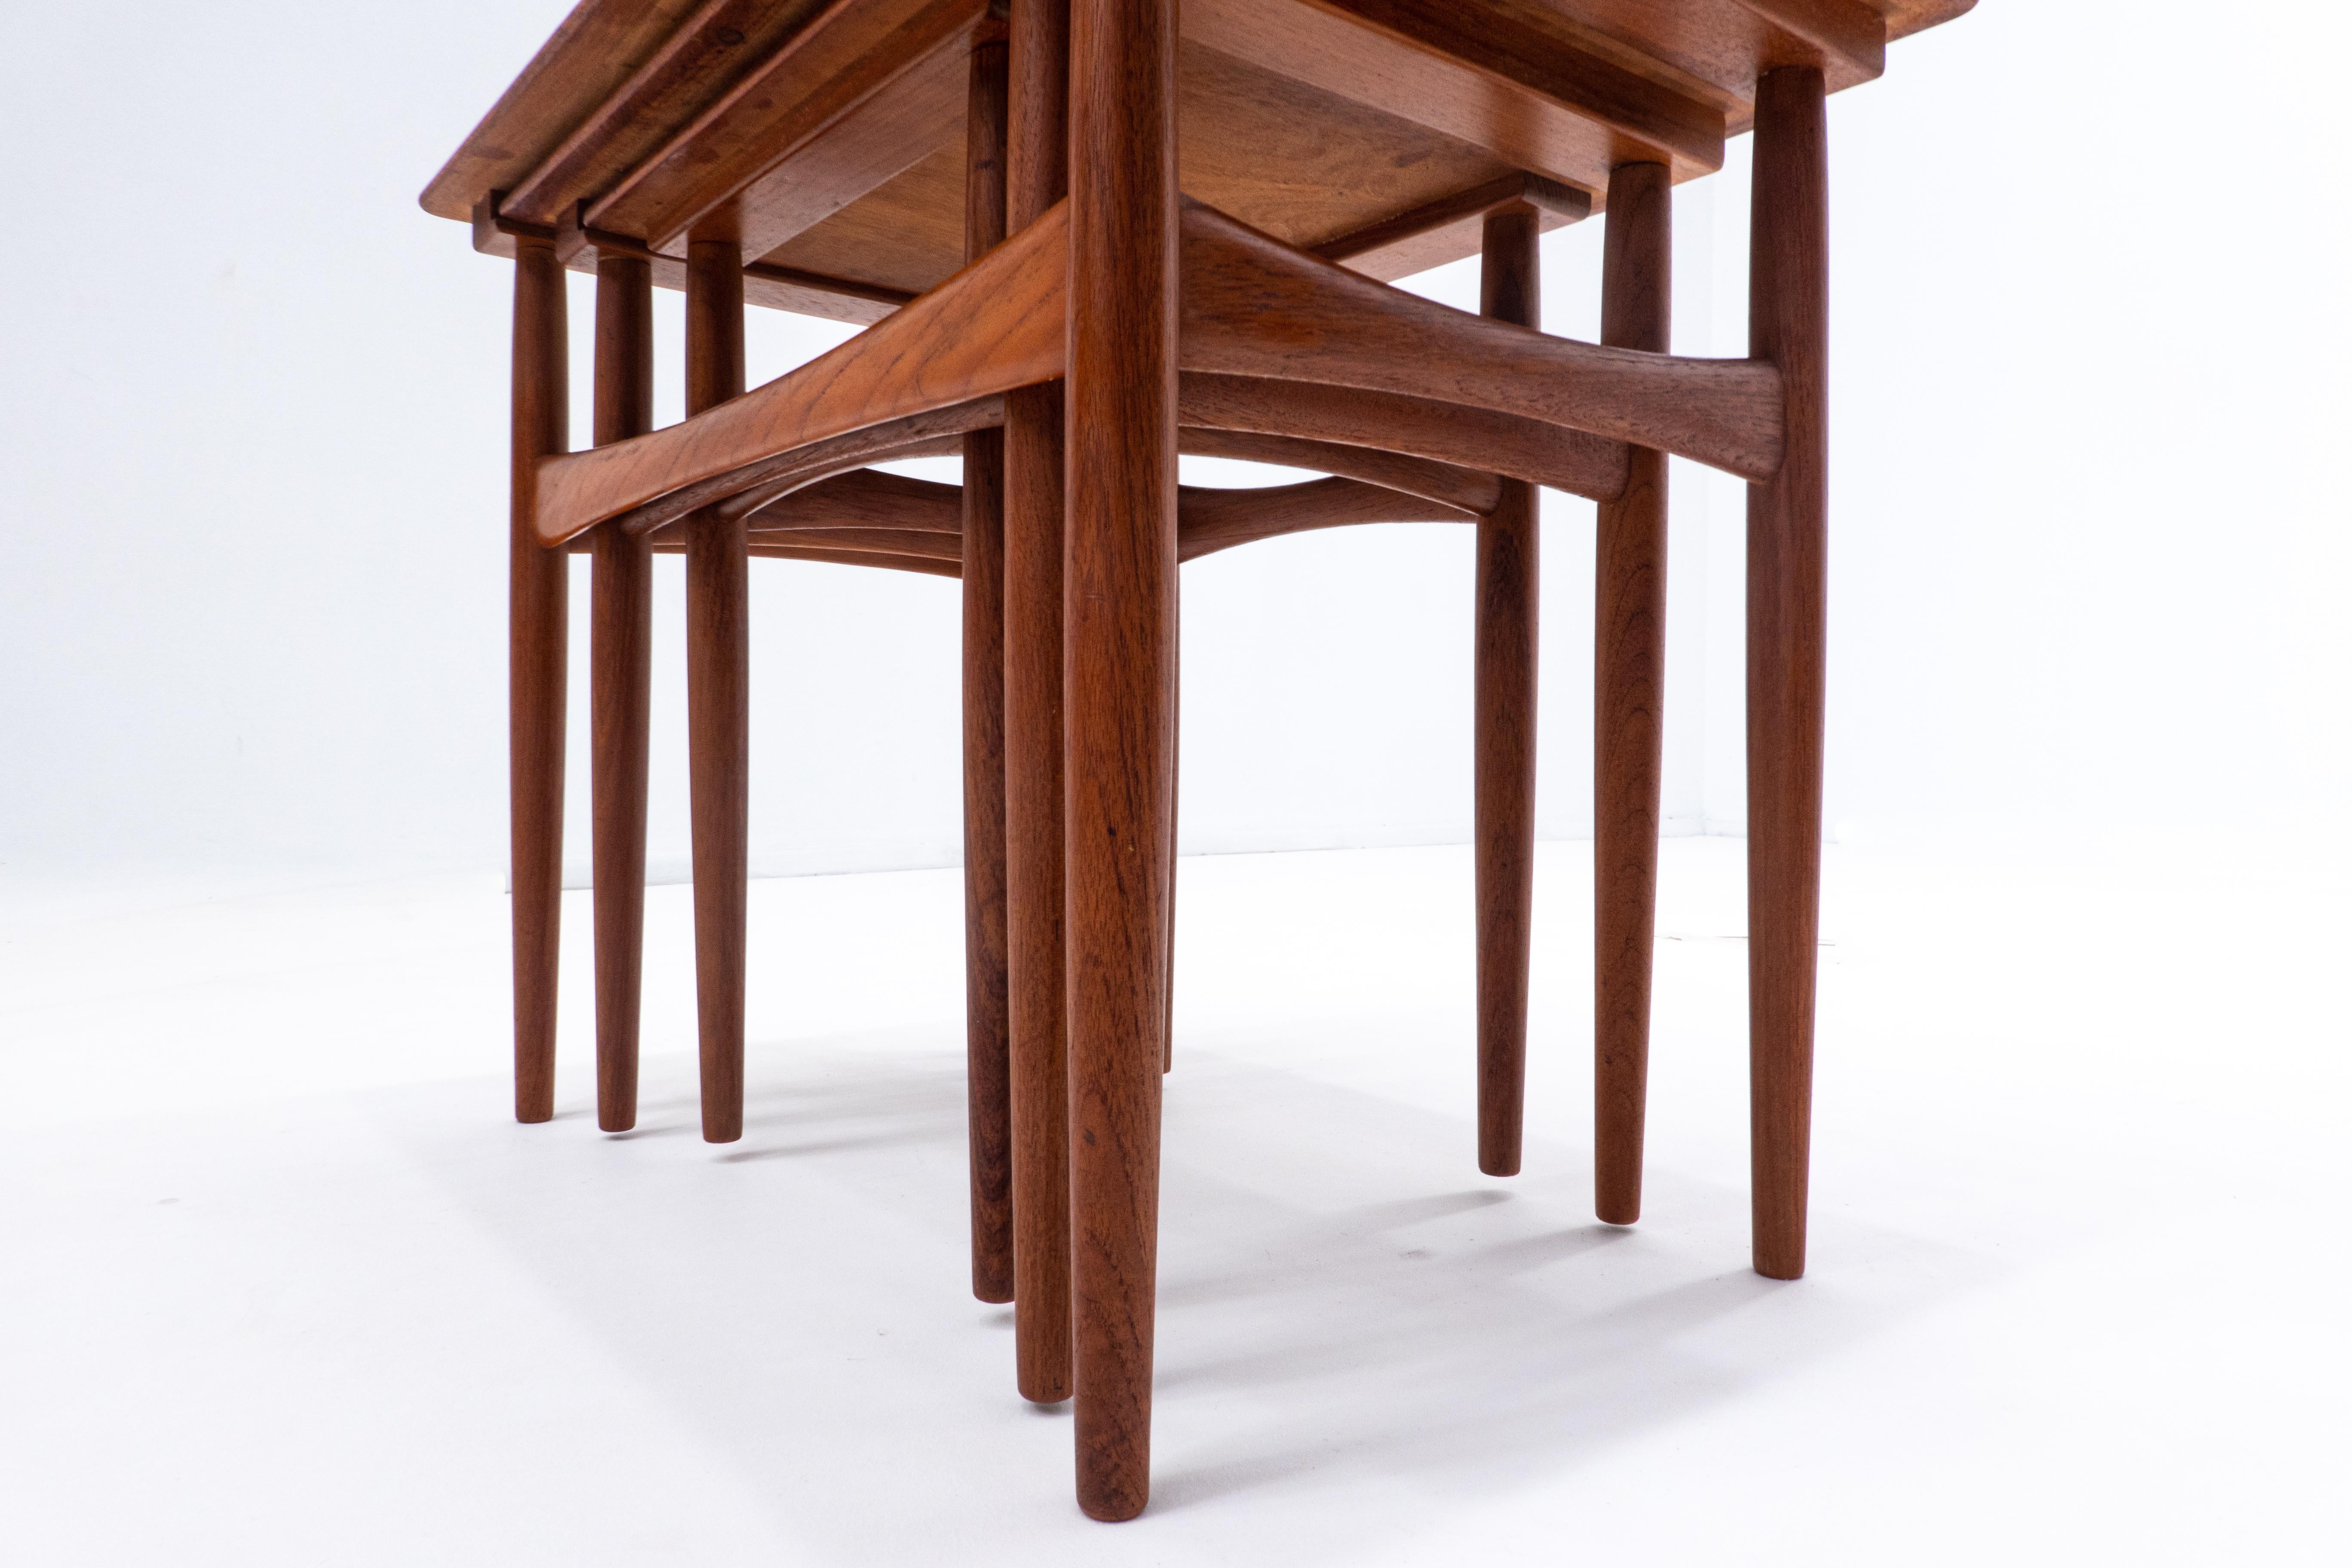 Mid-20th Century Mid-Century Modern Wooden Nesting Tables, Scandinavian, 1960s For Sale